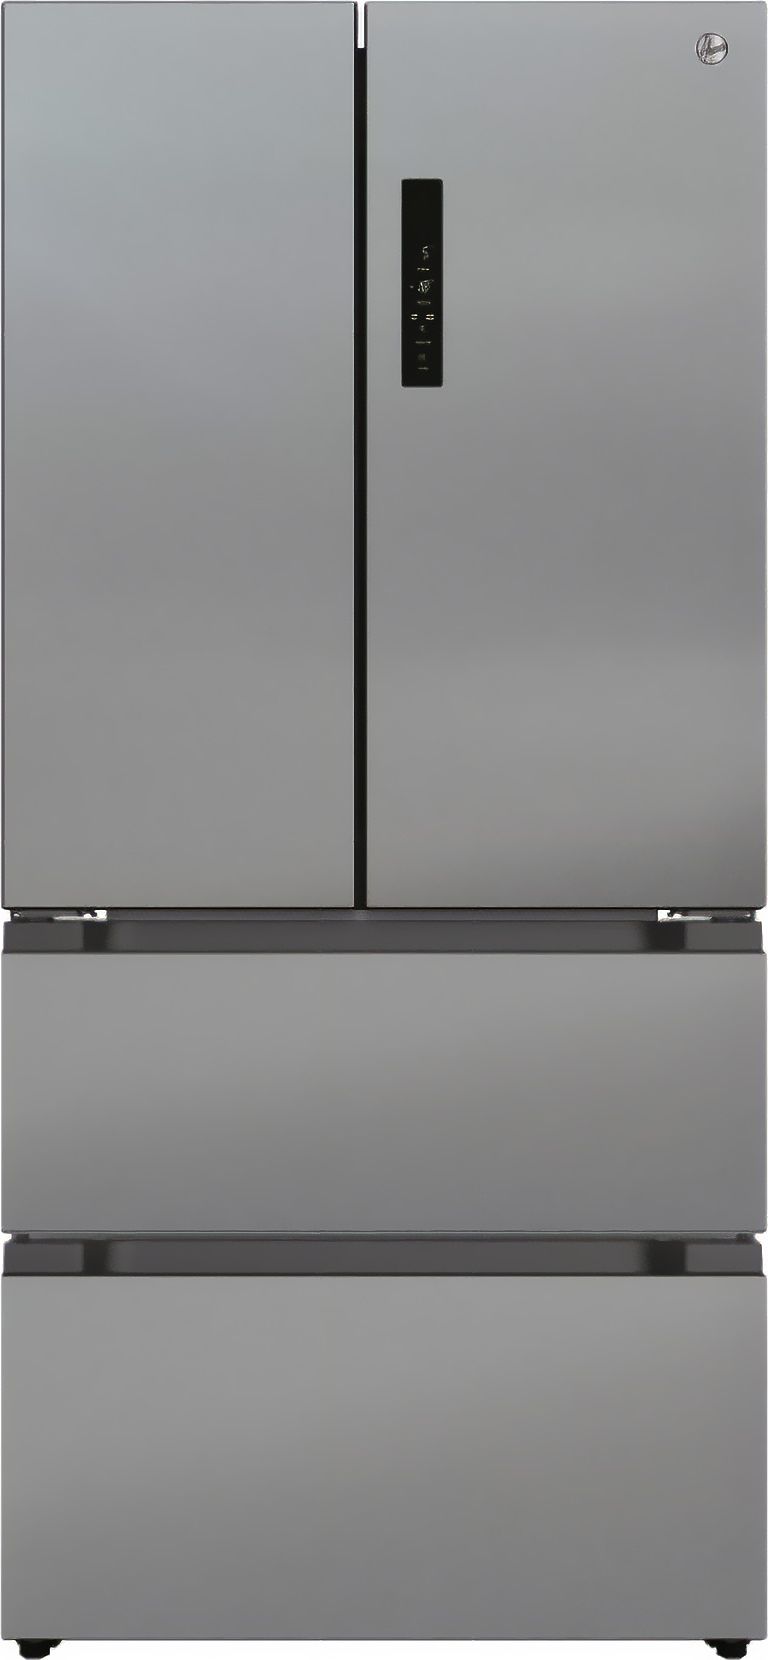 Hoover H-FRIDGE 700 MAXI HSF818EXK Non-Plumbed Total No Frost American Fridge Freezer - Stainless Steel - F Rated, Stainless Steel